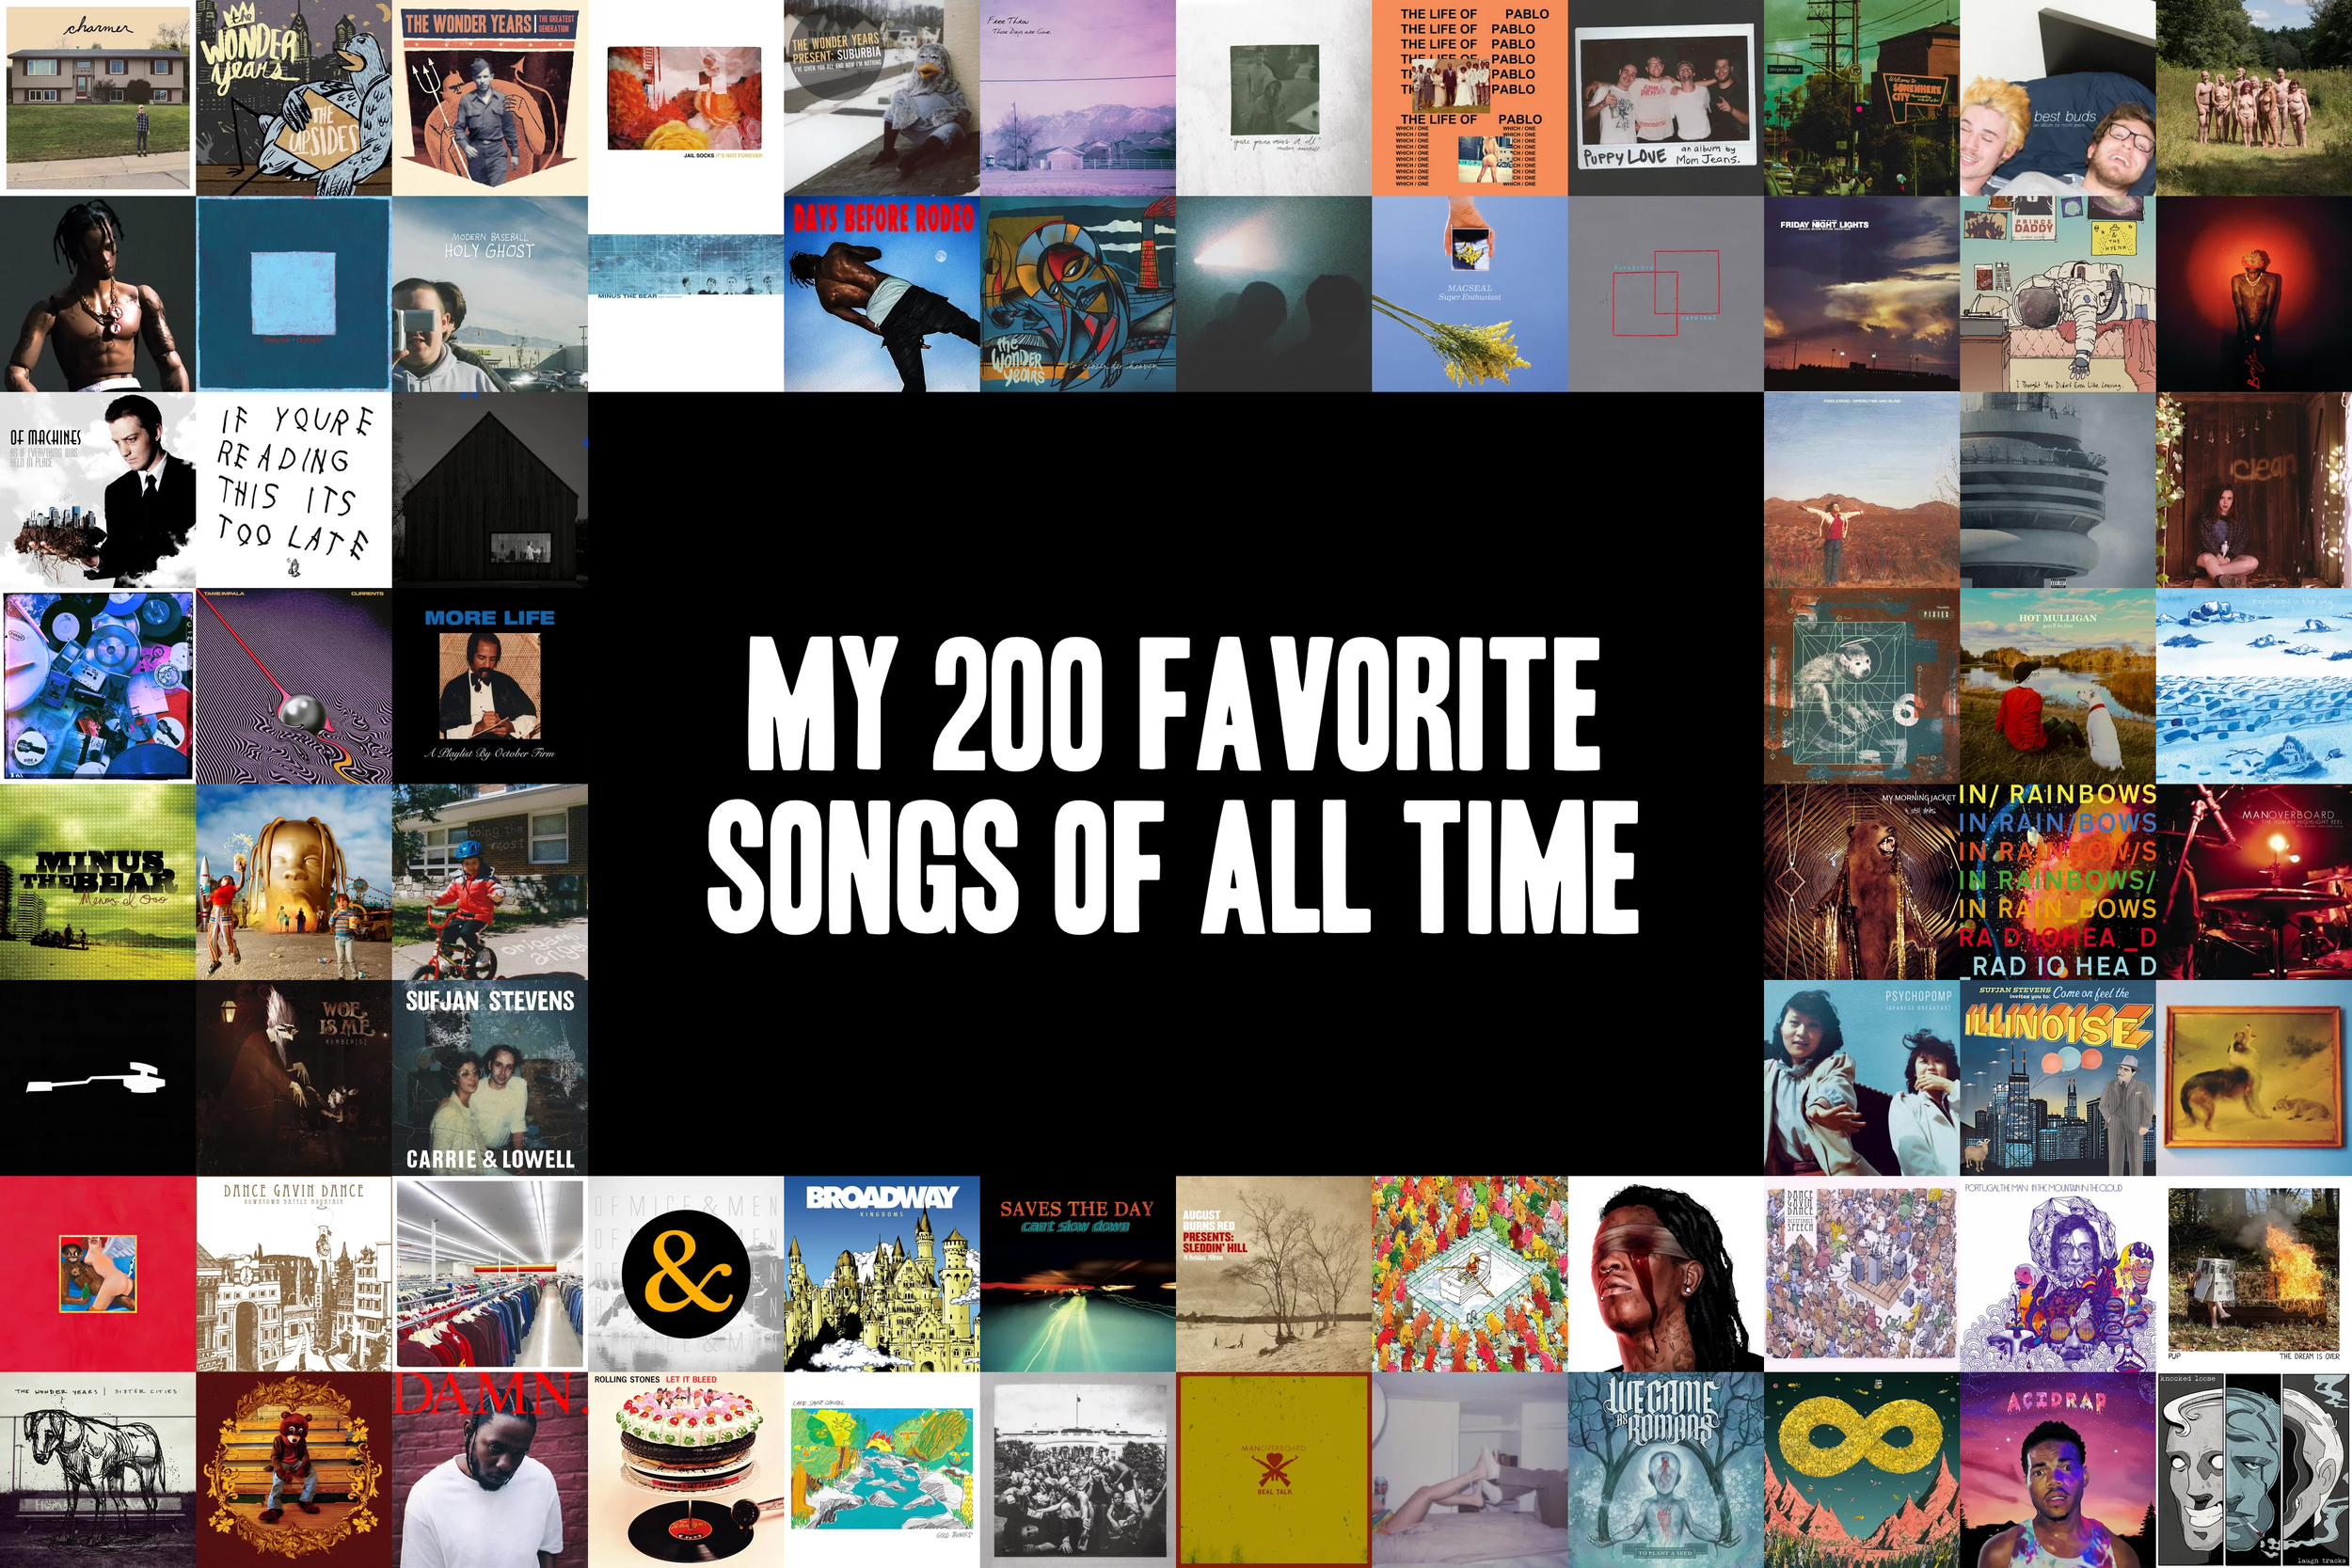 My 200 Favorite Songs of All Time